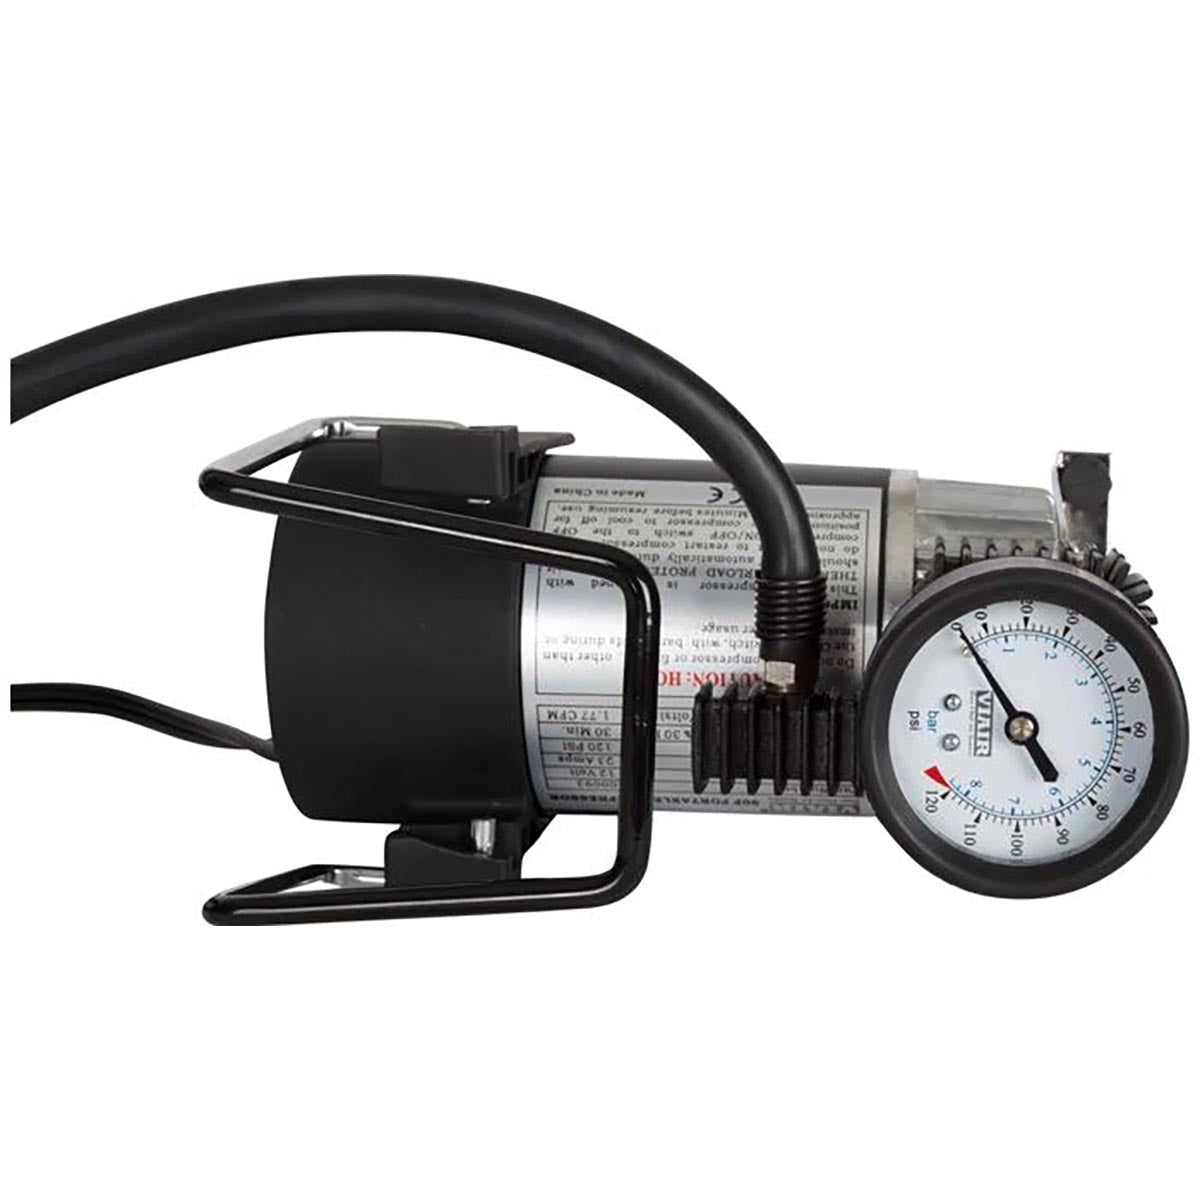 Viair 90p Compressor Kit With Press-on Chuck - Up To 31" Tires